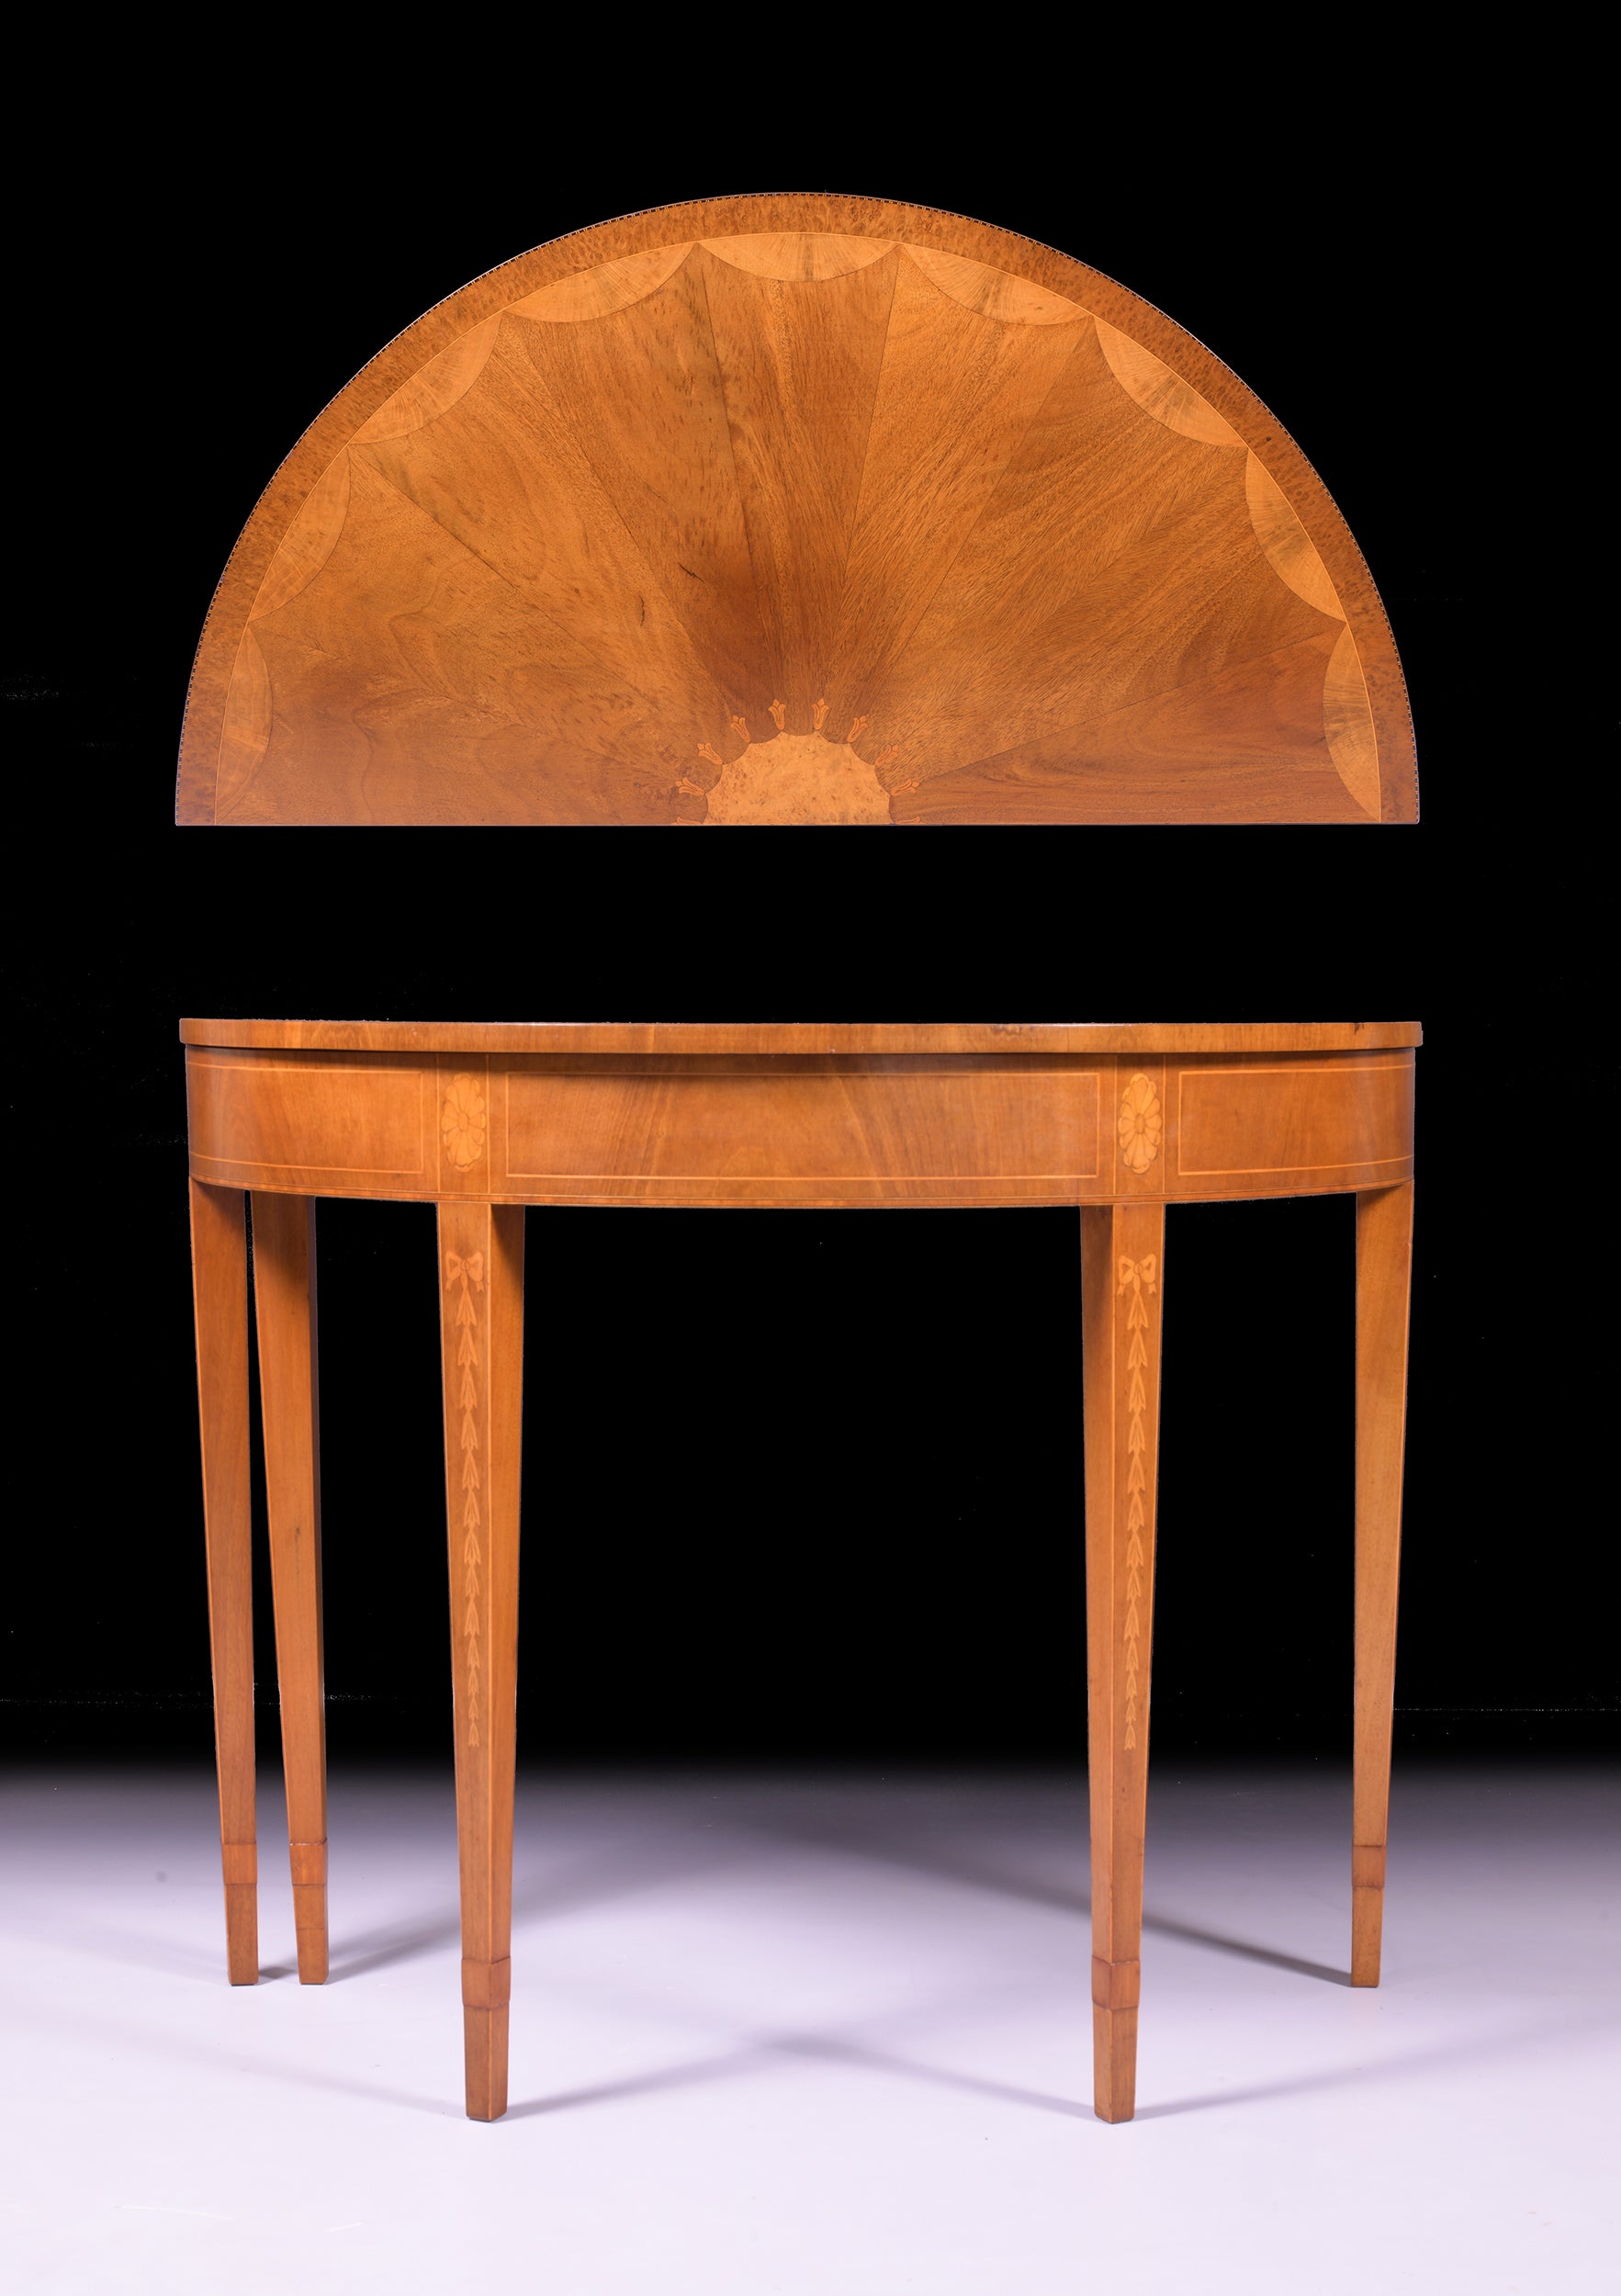 A VERY FINE PAIR OF CARD TABLES BY JAMES HICKS - REF No. 9008